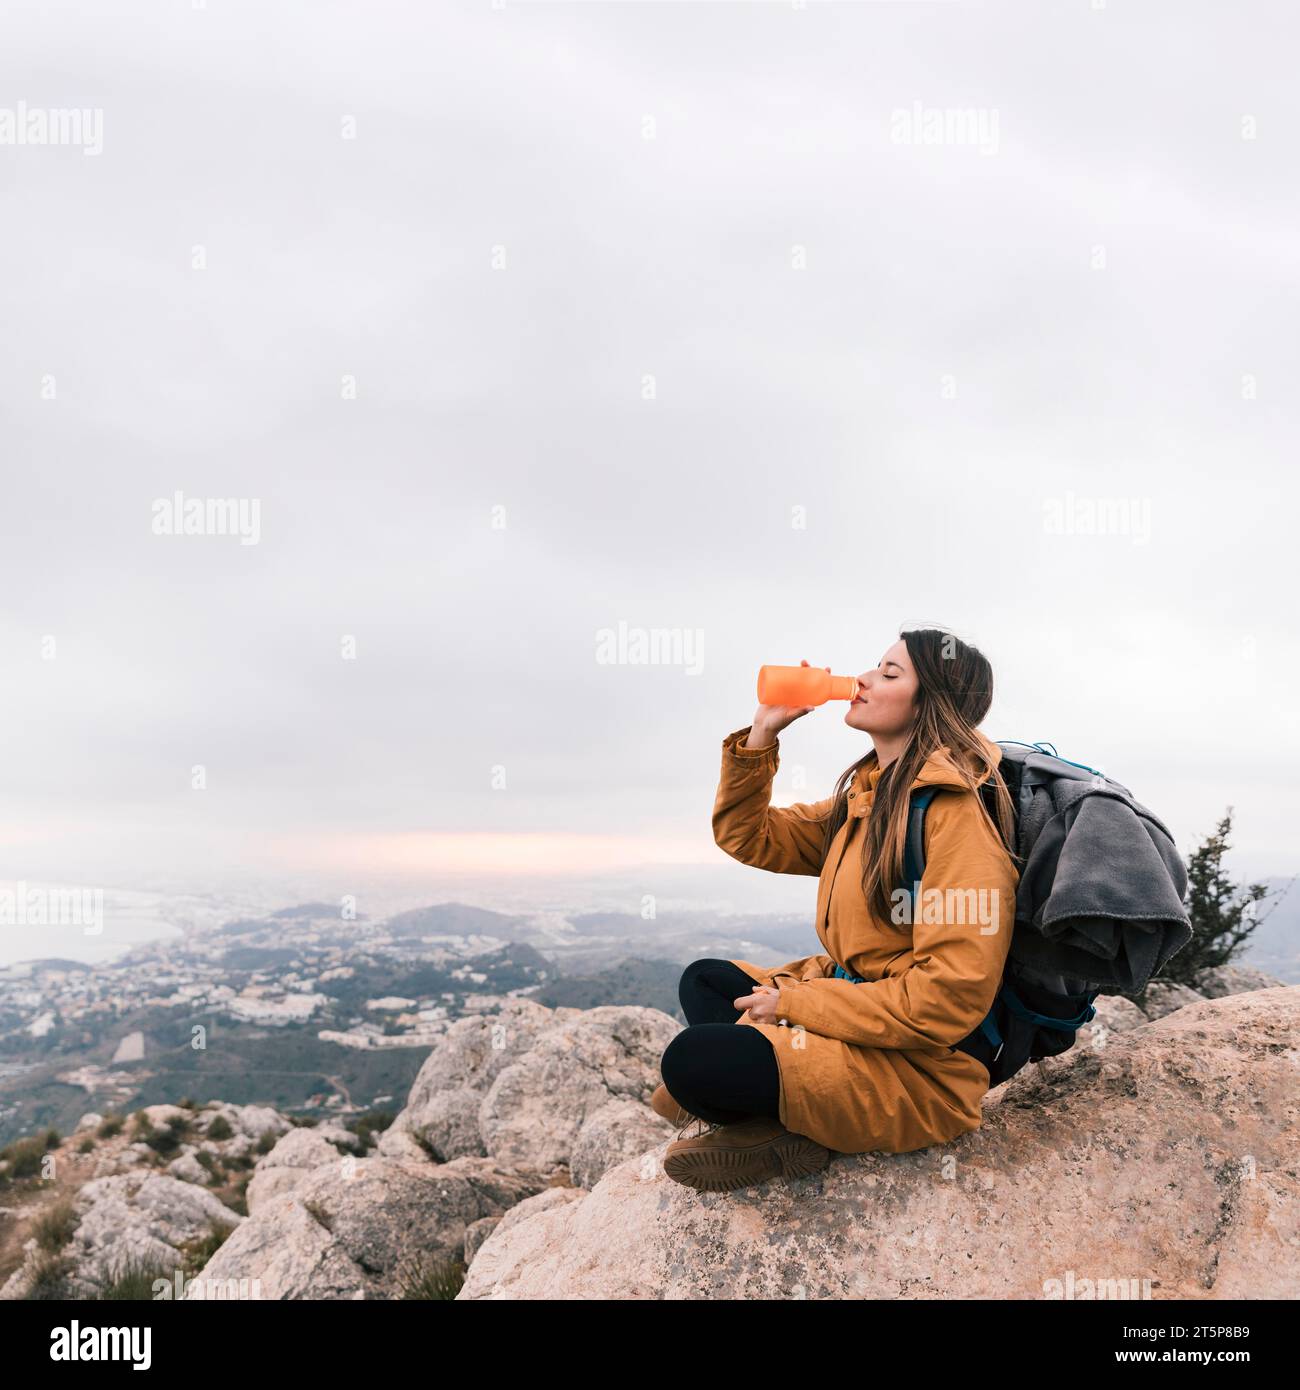 Female backpacker sitting top mountain drinking water Stock Photo